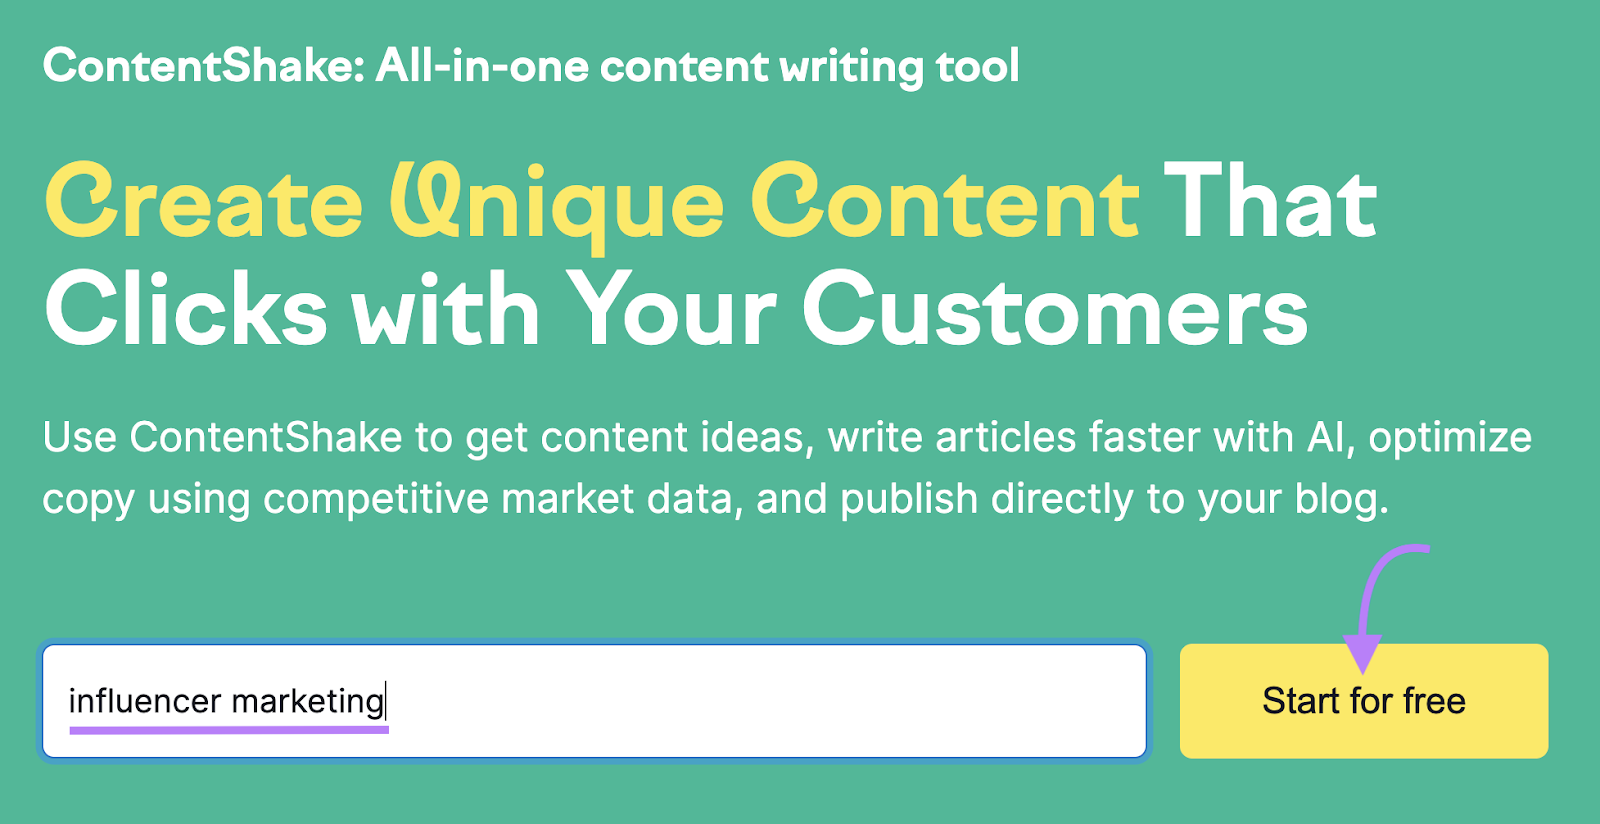 Searching for "content marketing" in ContentShake